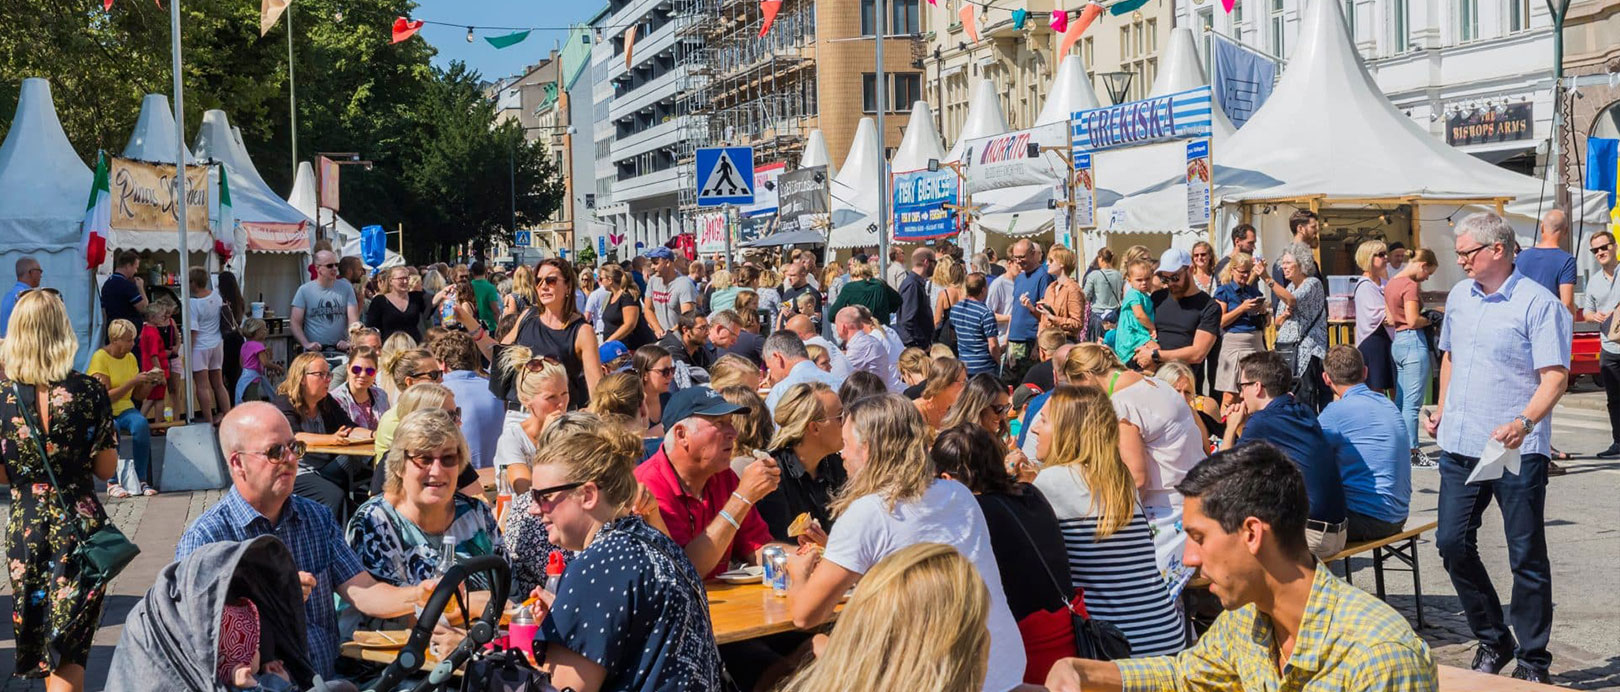 25 Of The Best Summer Food Festivals In Europe 